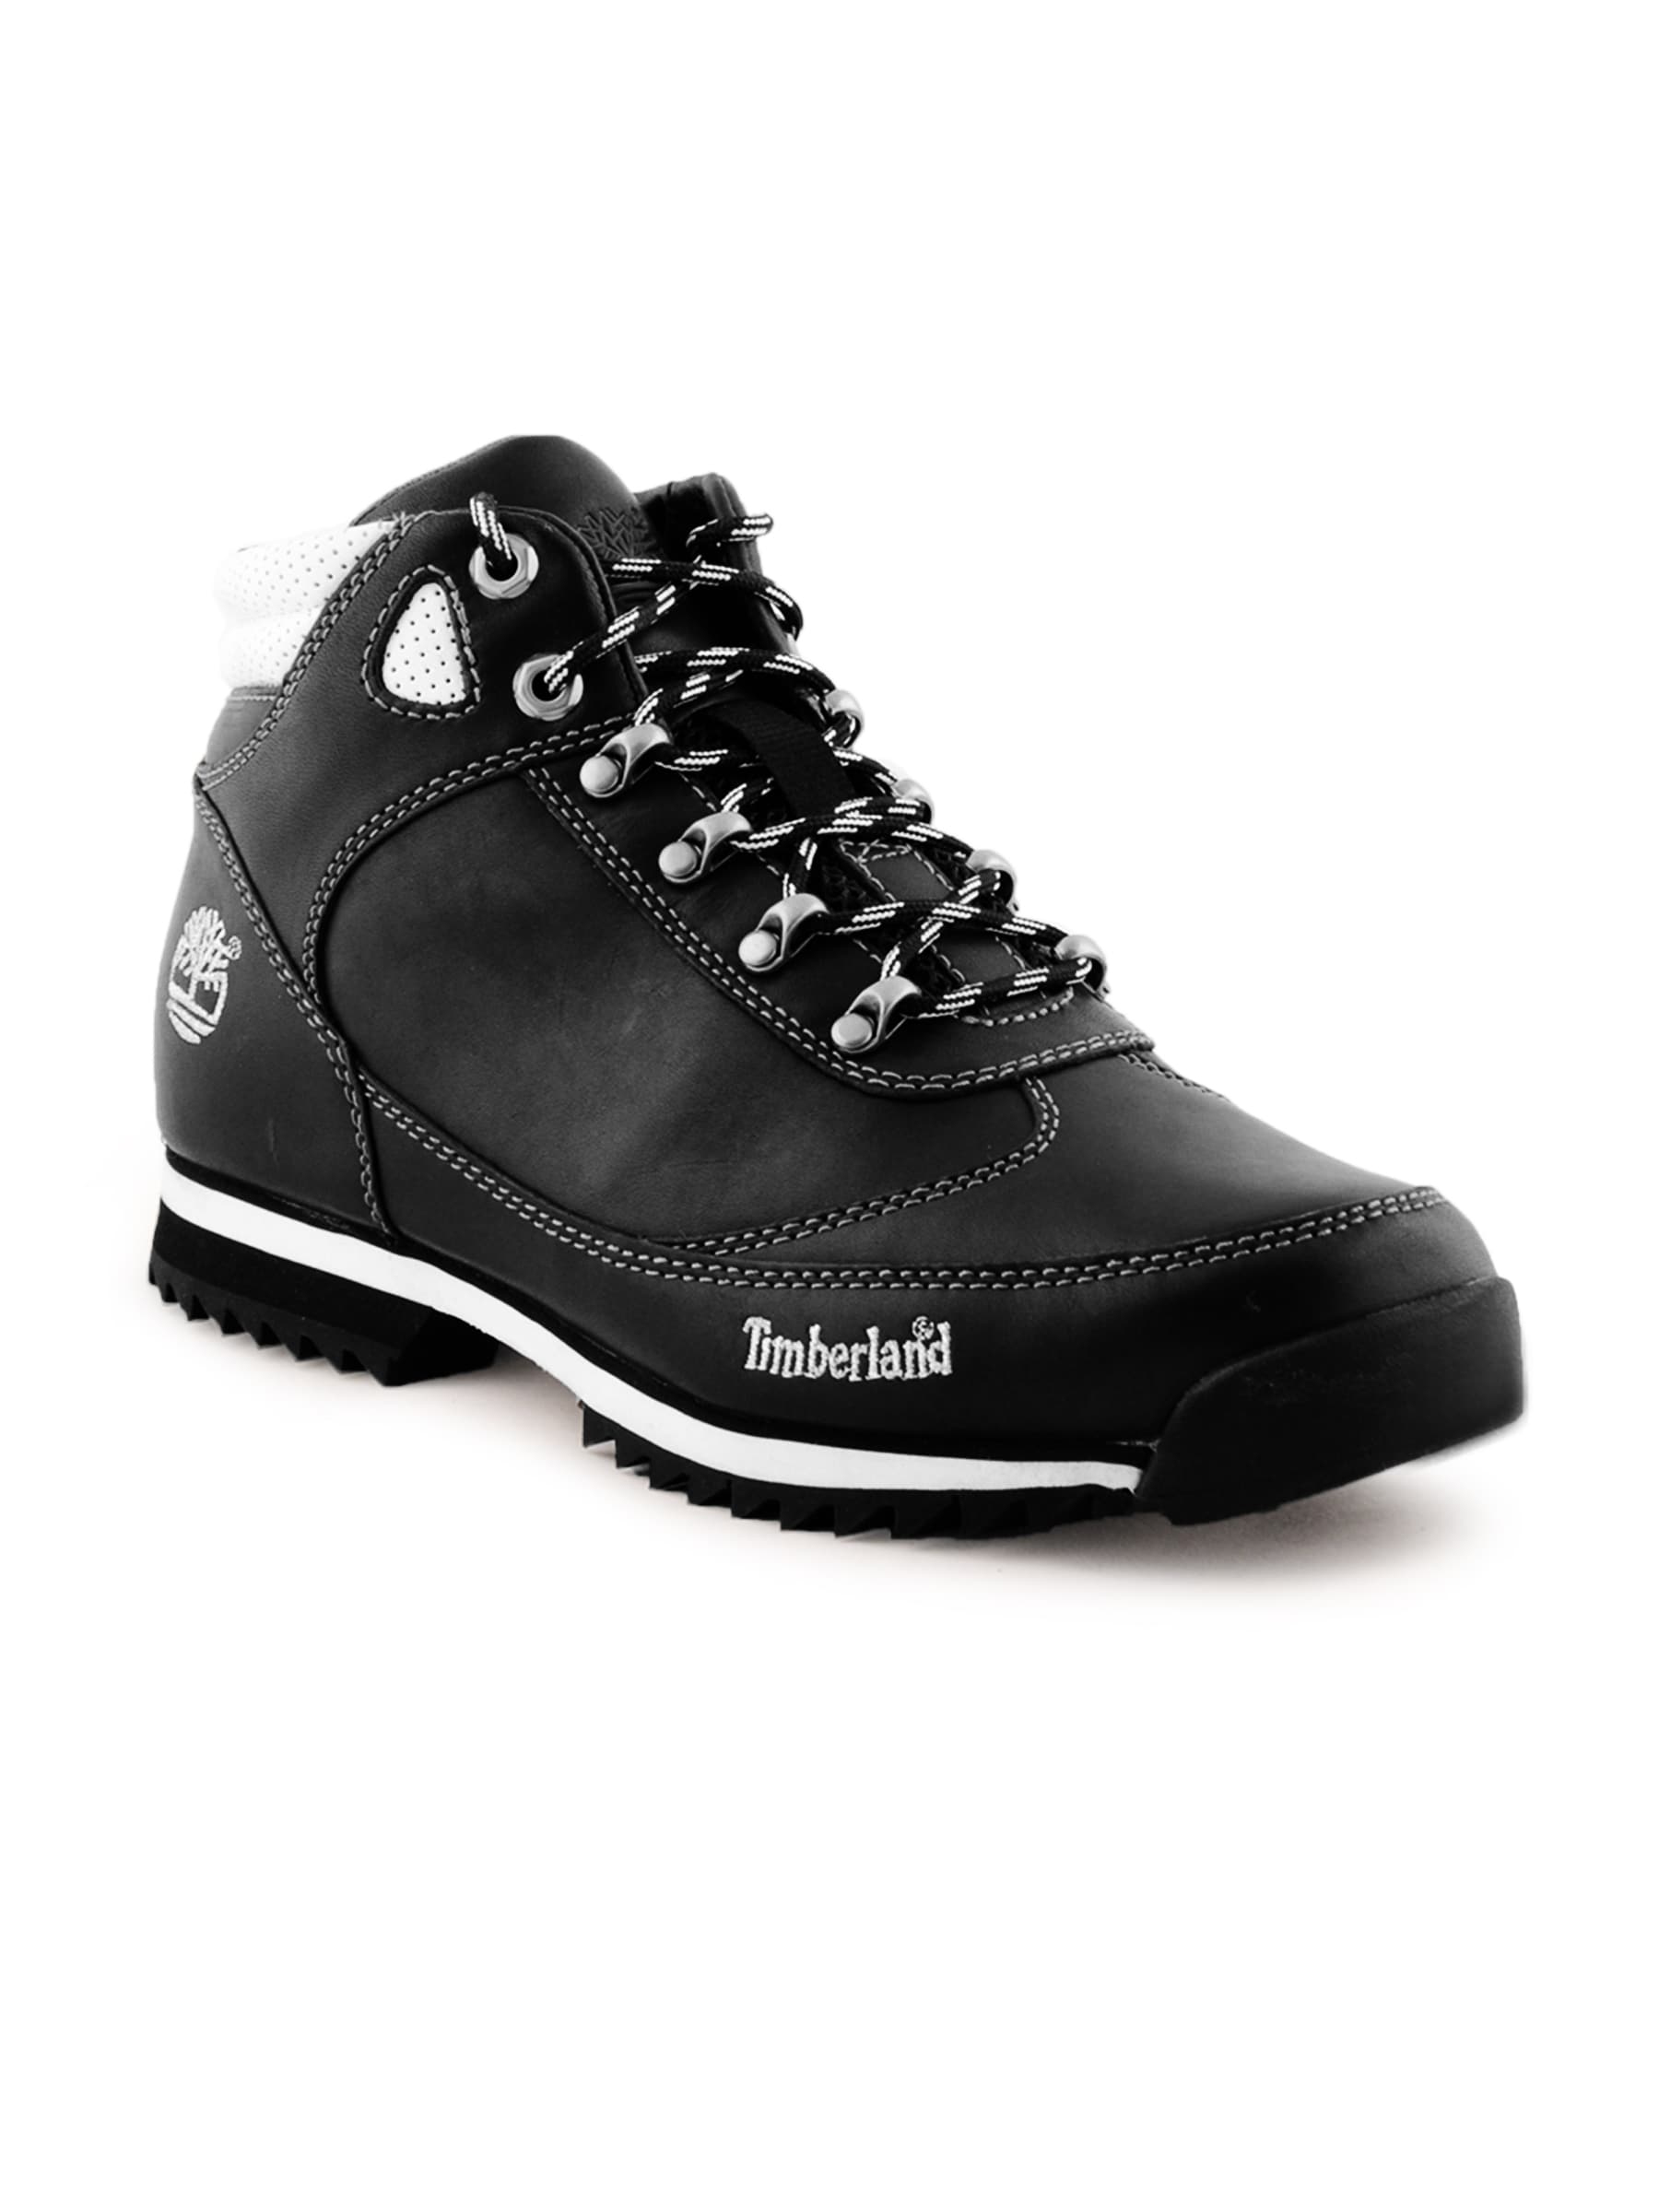 Timberland Men Casual Black Casual Shoes